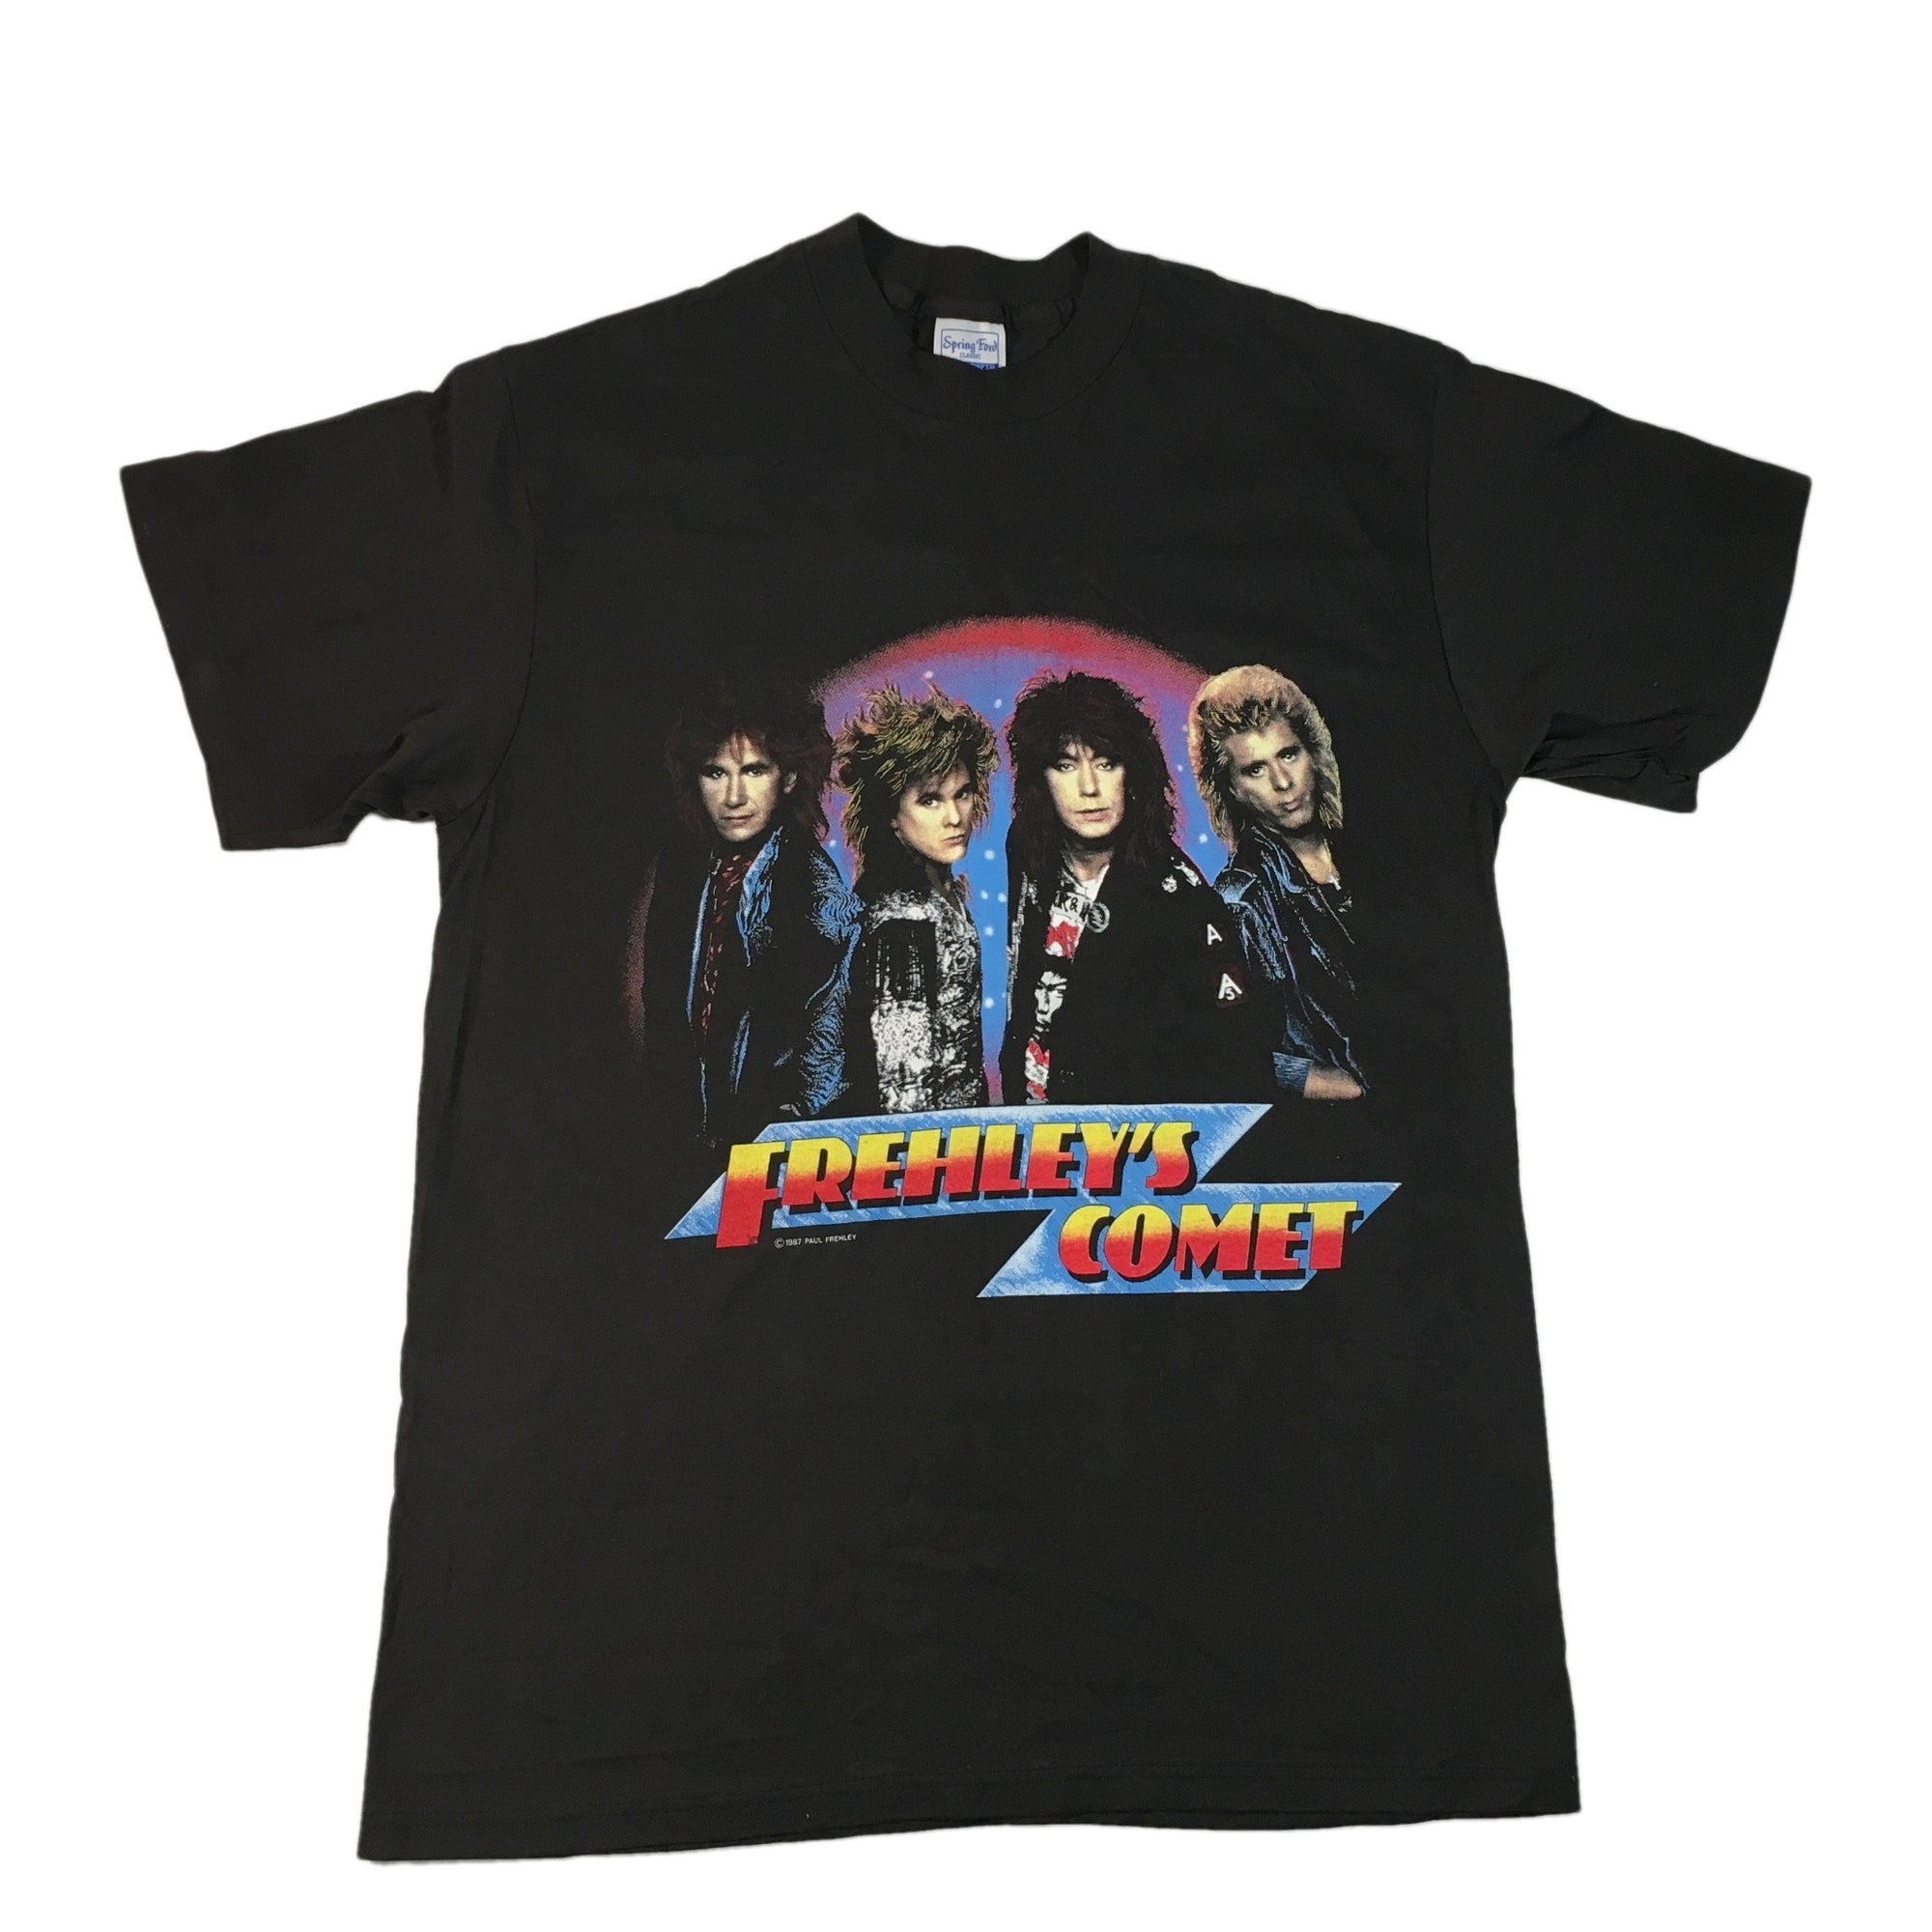 Vintage Frehley's Comet "Second Sighting" T-Shirt - jointcustodydc